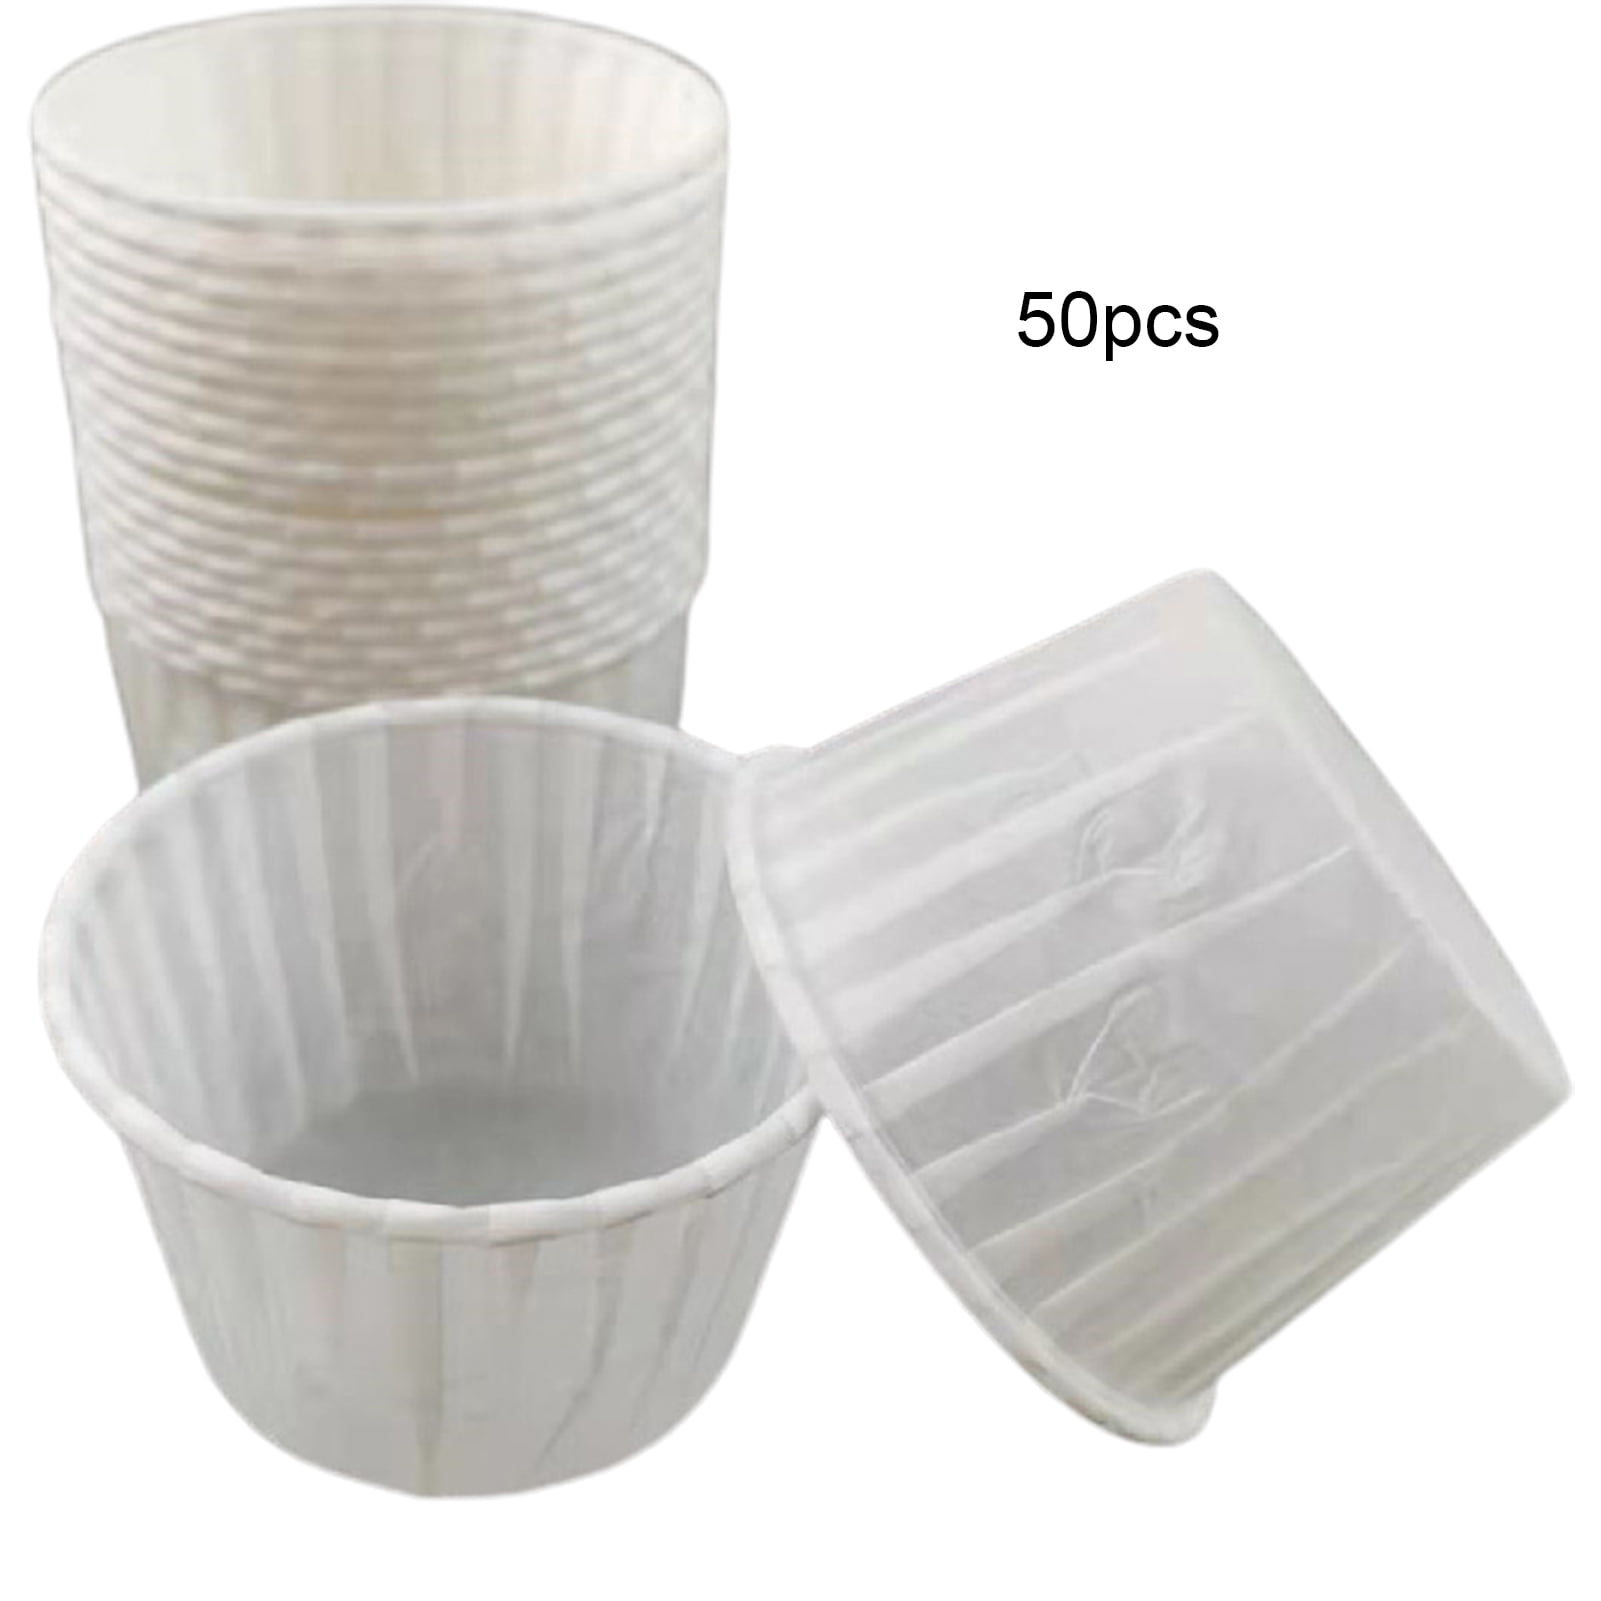 Muffin Liners for Baking - 50pcs White Extra Large Size Cupcake Liners Baking Supplies, Thick Jumbo Parchment Paper Sheets Cute Cups, Greaseproof